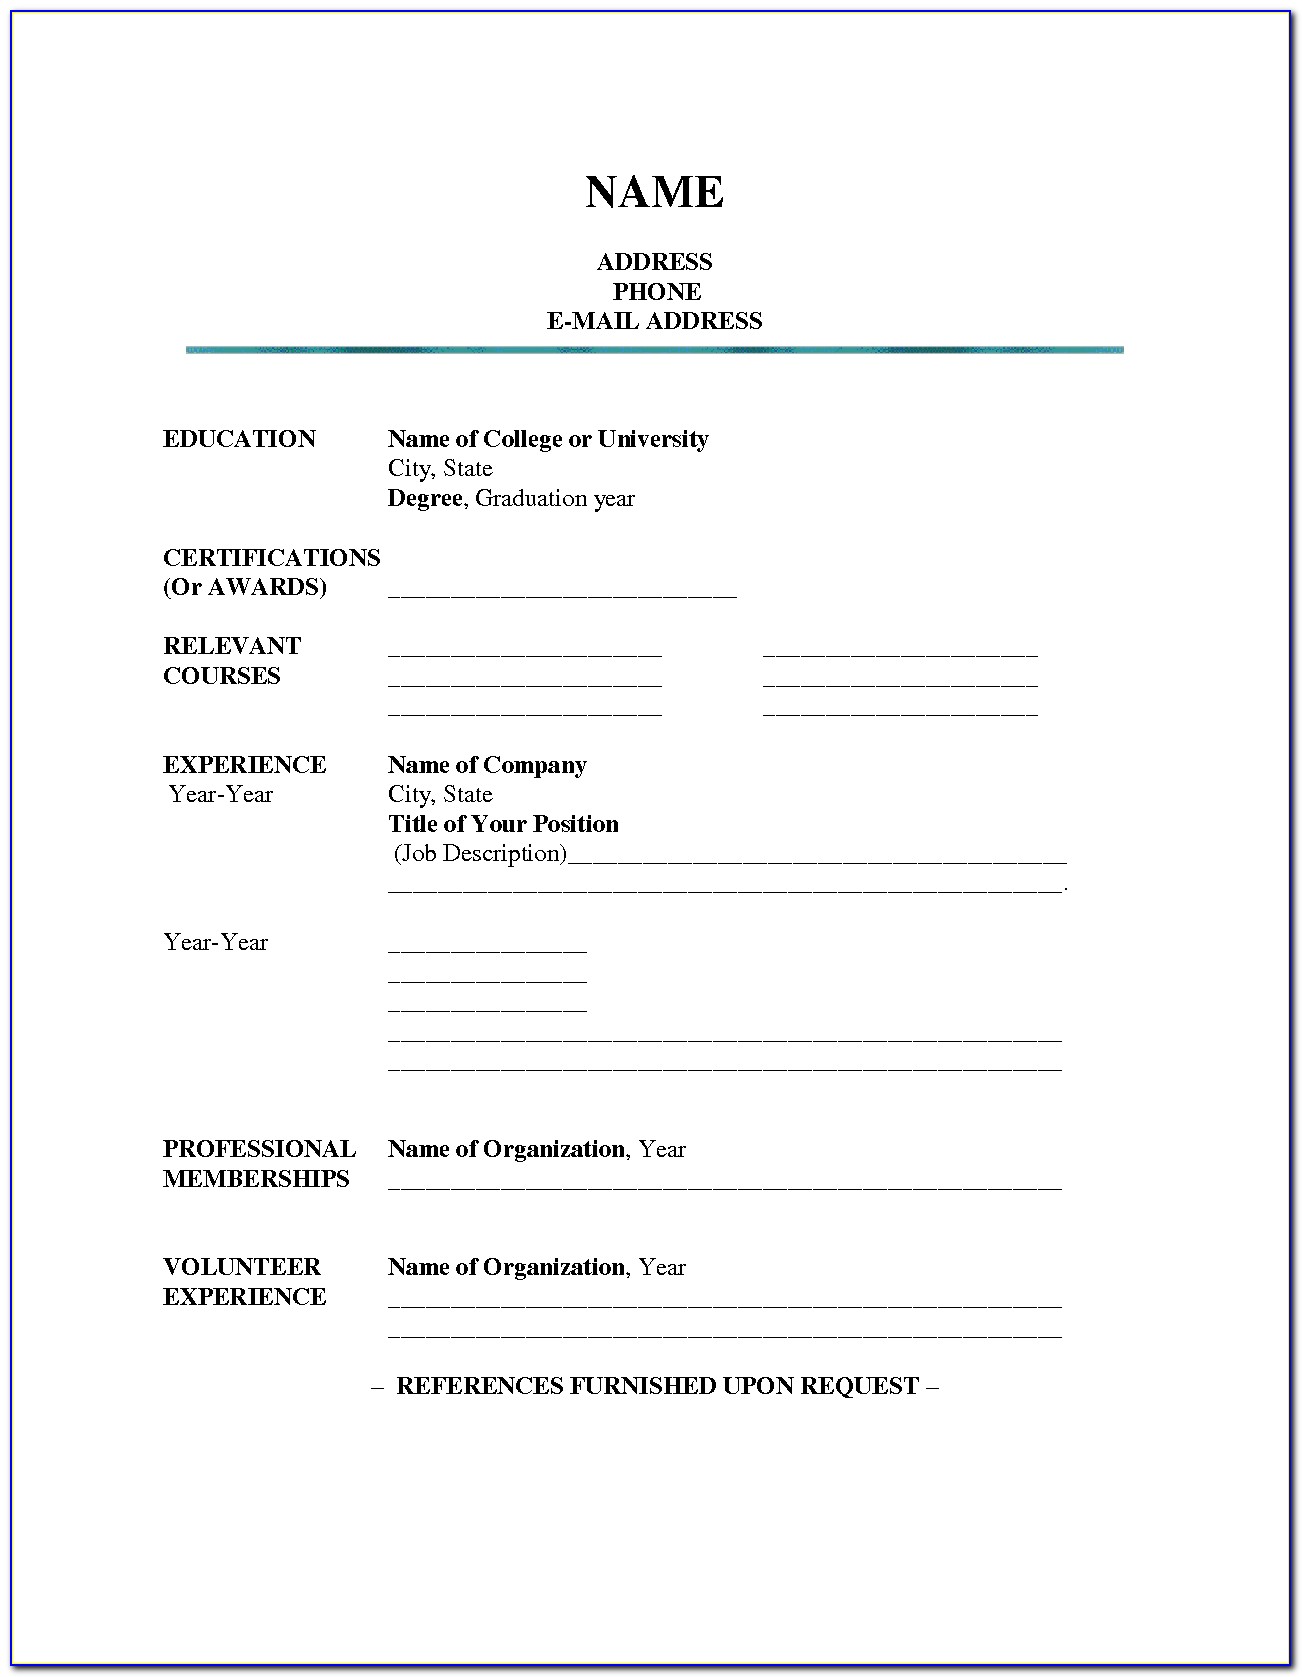 Simple Fill In The Blank Resume Templates